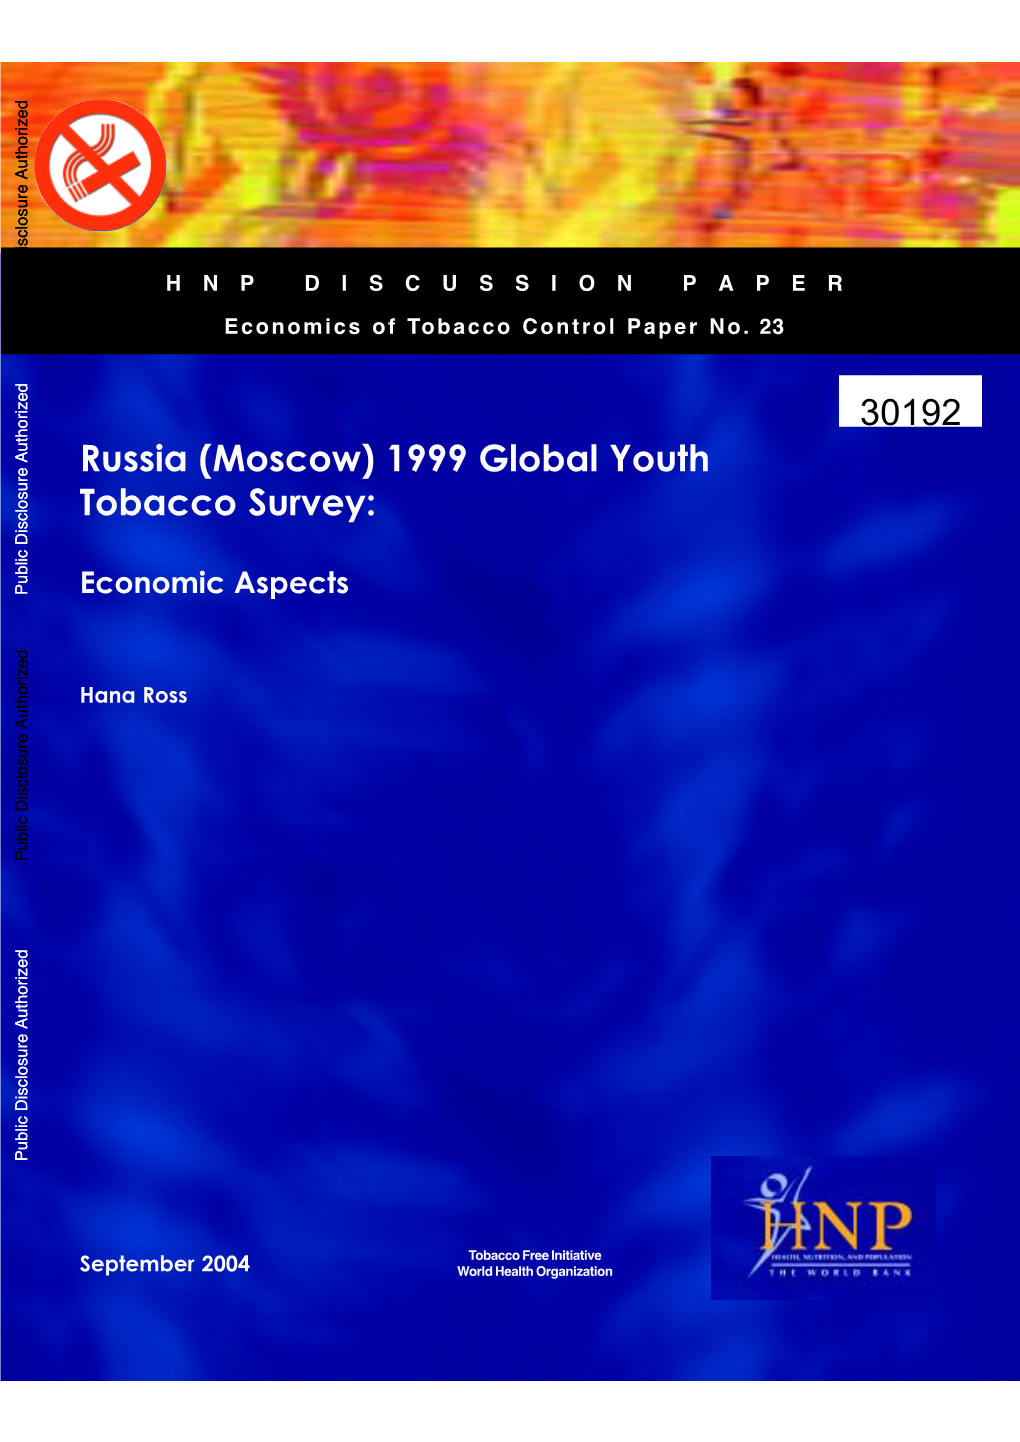 Russia (Moscow) 1999 Global Youth Tobacco Survey: About This Series